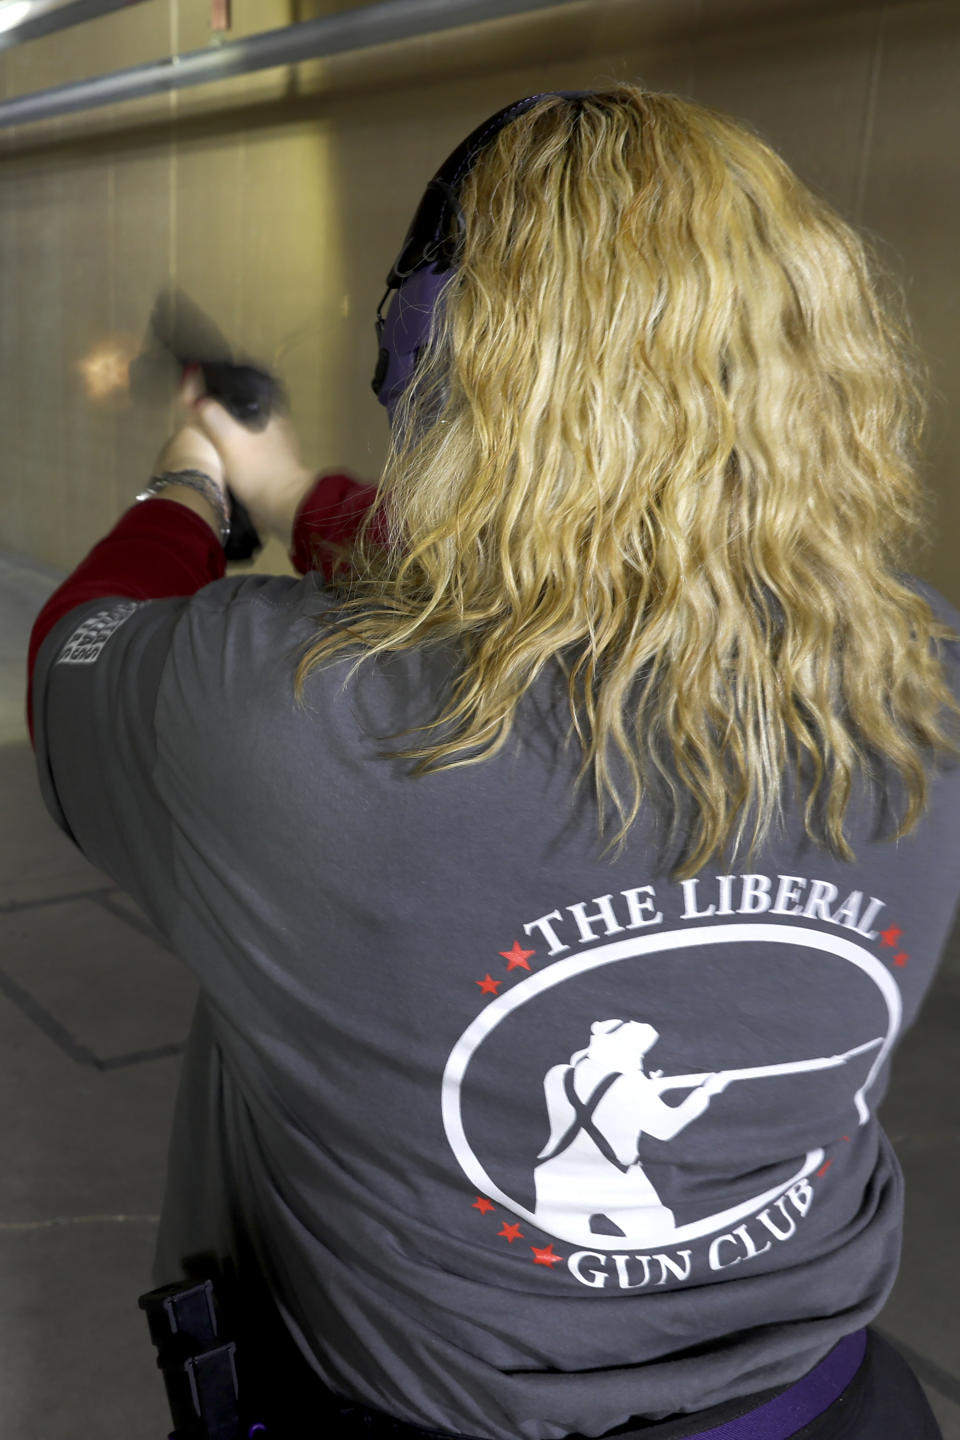 In this Wednesday, Feb. 5, 2020, photo, Kat Ellsworth of Chicago, fires her Sig Sauer P320 X-Five Legion hand gun, one of the seven guns she owns at the Caliber Tactical Gun Range in Waukegan, Ill. Ellsworth was firmly against firearms and favored gun-control until just a few years ago when she went with a friend to a gun range and discovered a love for firearms and shooting. (AP Photo/Charles Rex Arbogast)